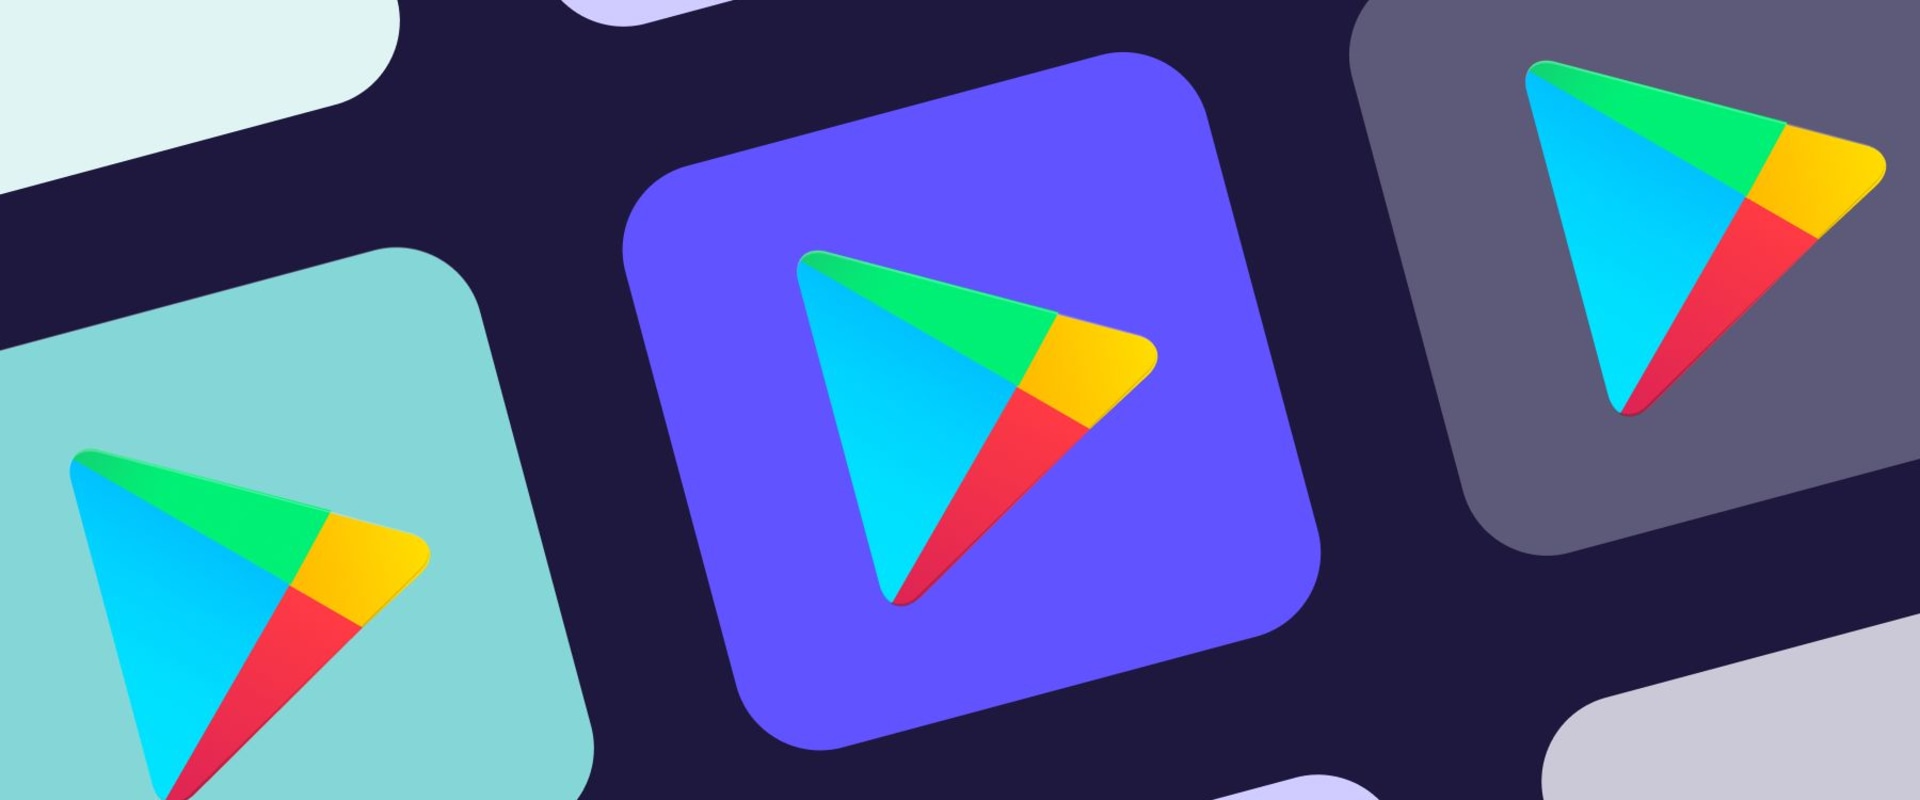 Designing a Good Icon for the Google Play Store